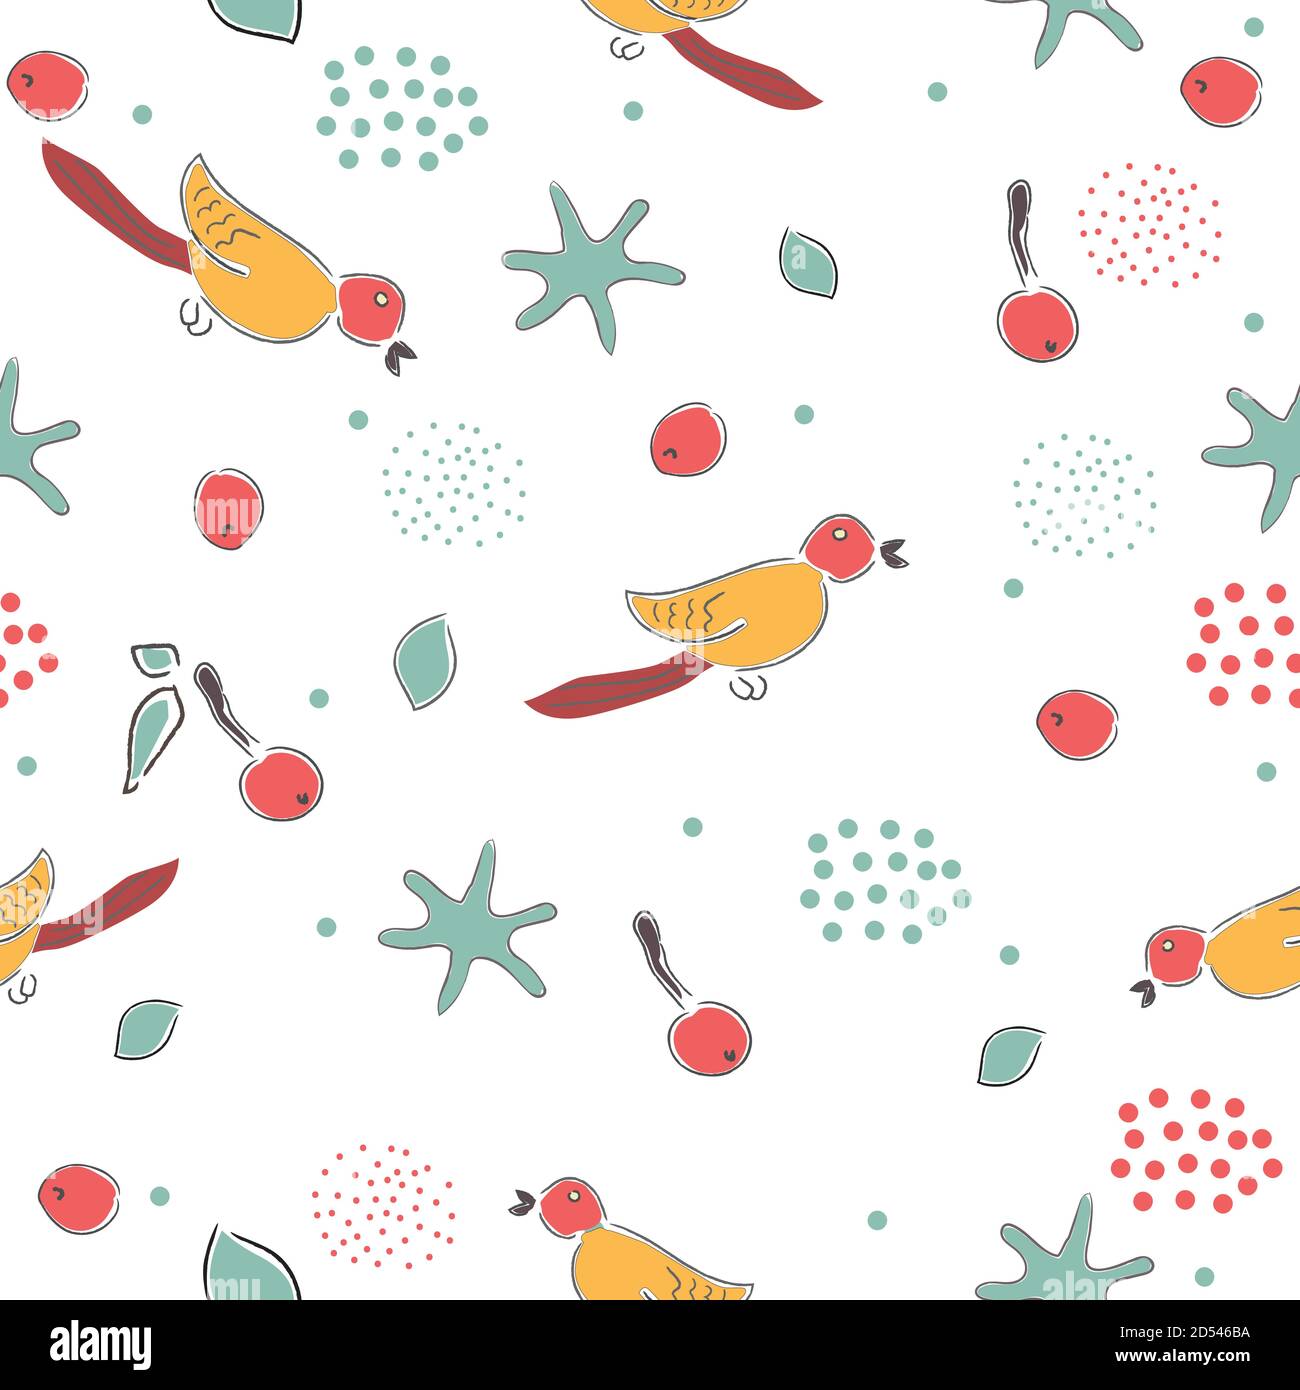 Cute Hand Drawn Pattern With Red Bird. Great for Wall Art, t-shirts, cups, fabric, textile, gift wrapping, swatches, prints, scrapbooks, etc. Vector I Stock Vector